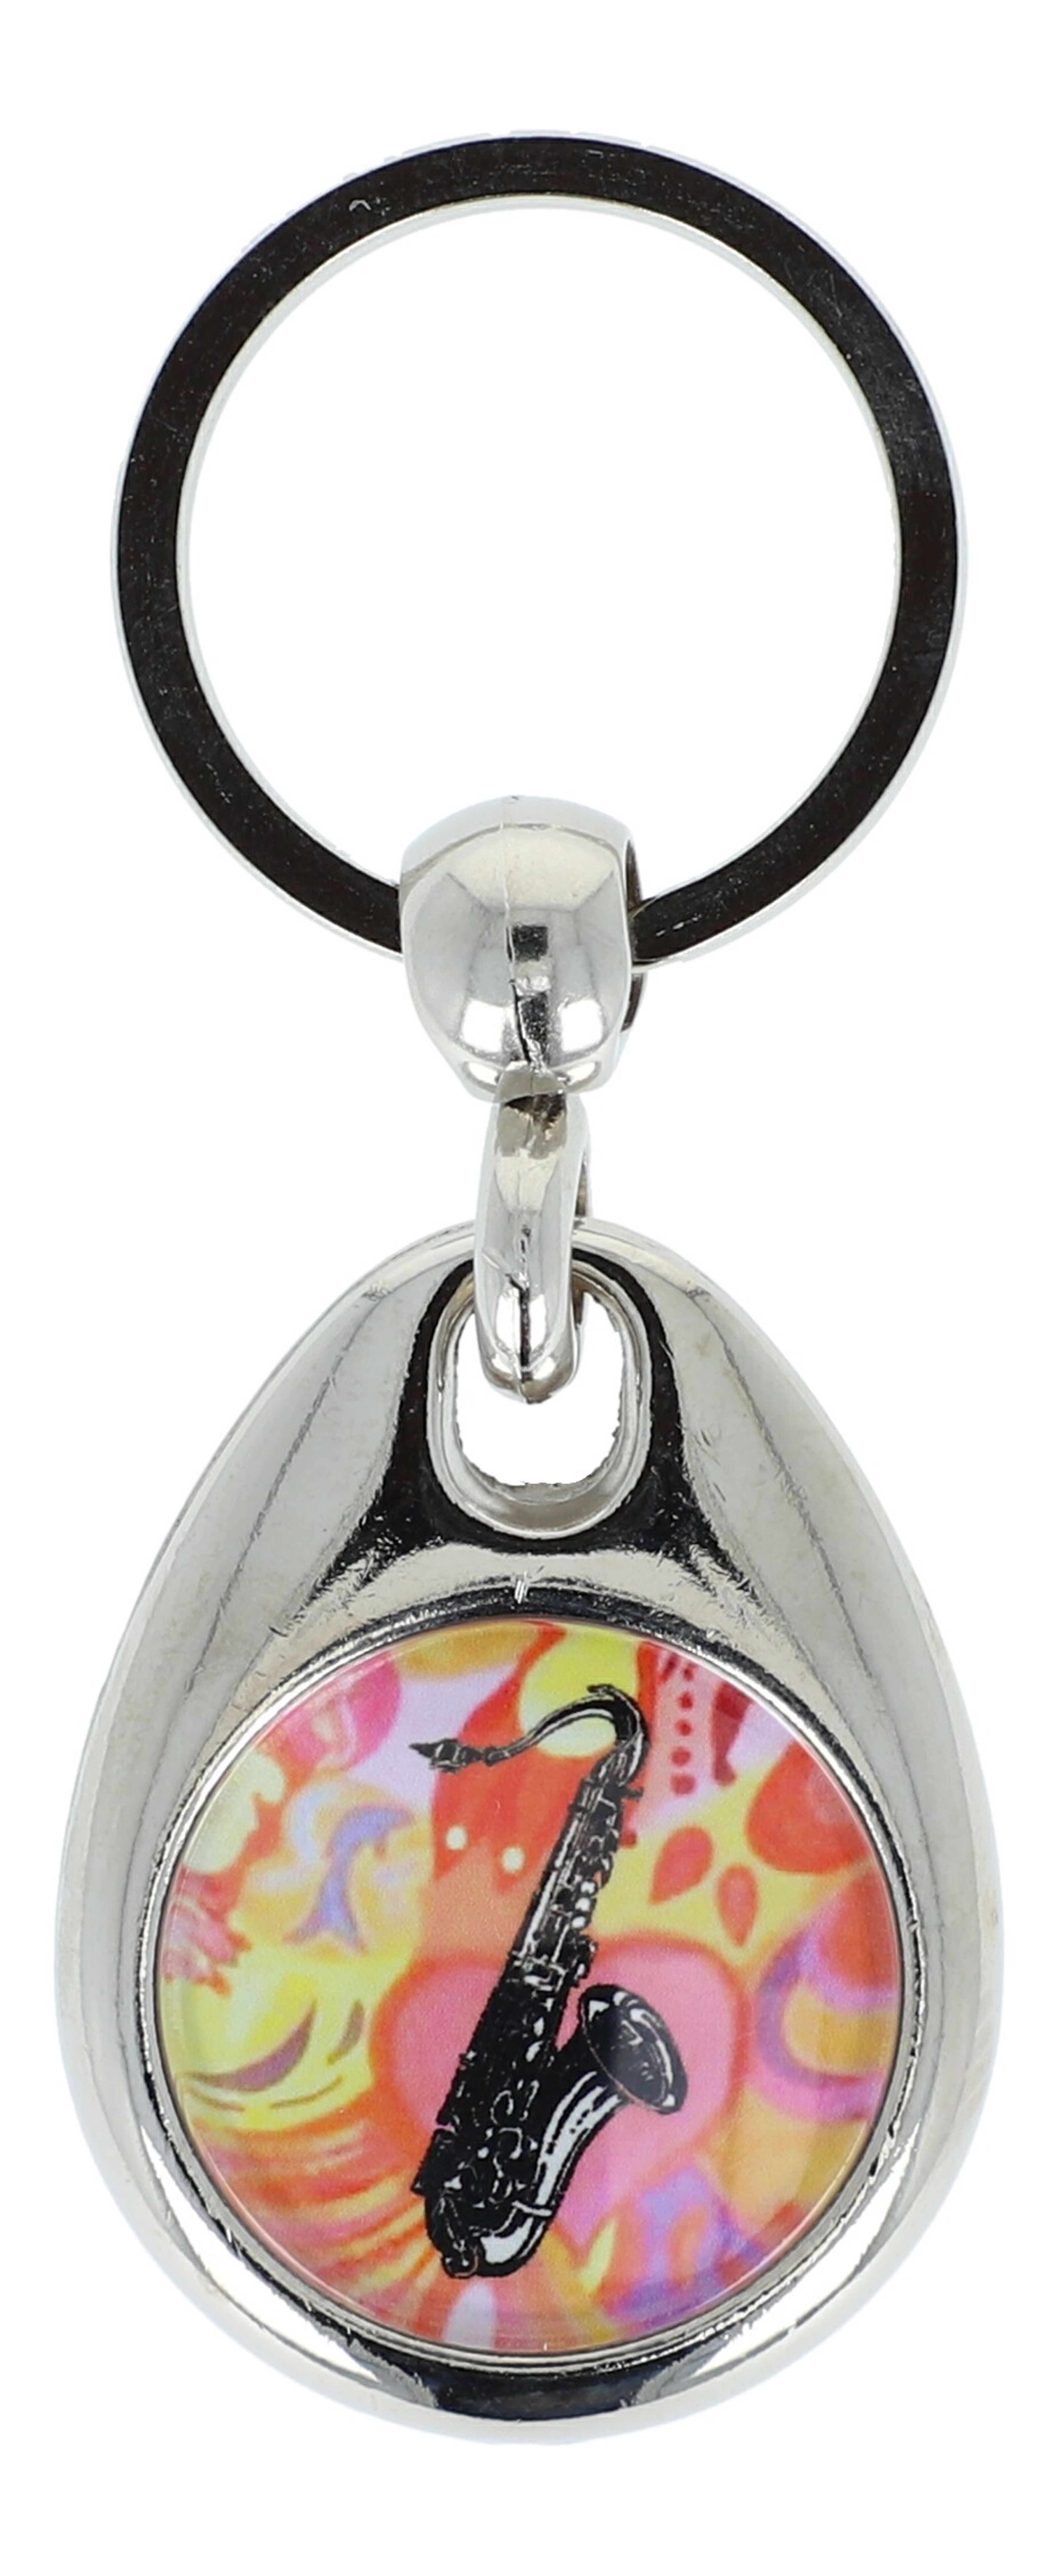 colorful keychains with musical instruments and Buy motifs (double-sided) wholesale